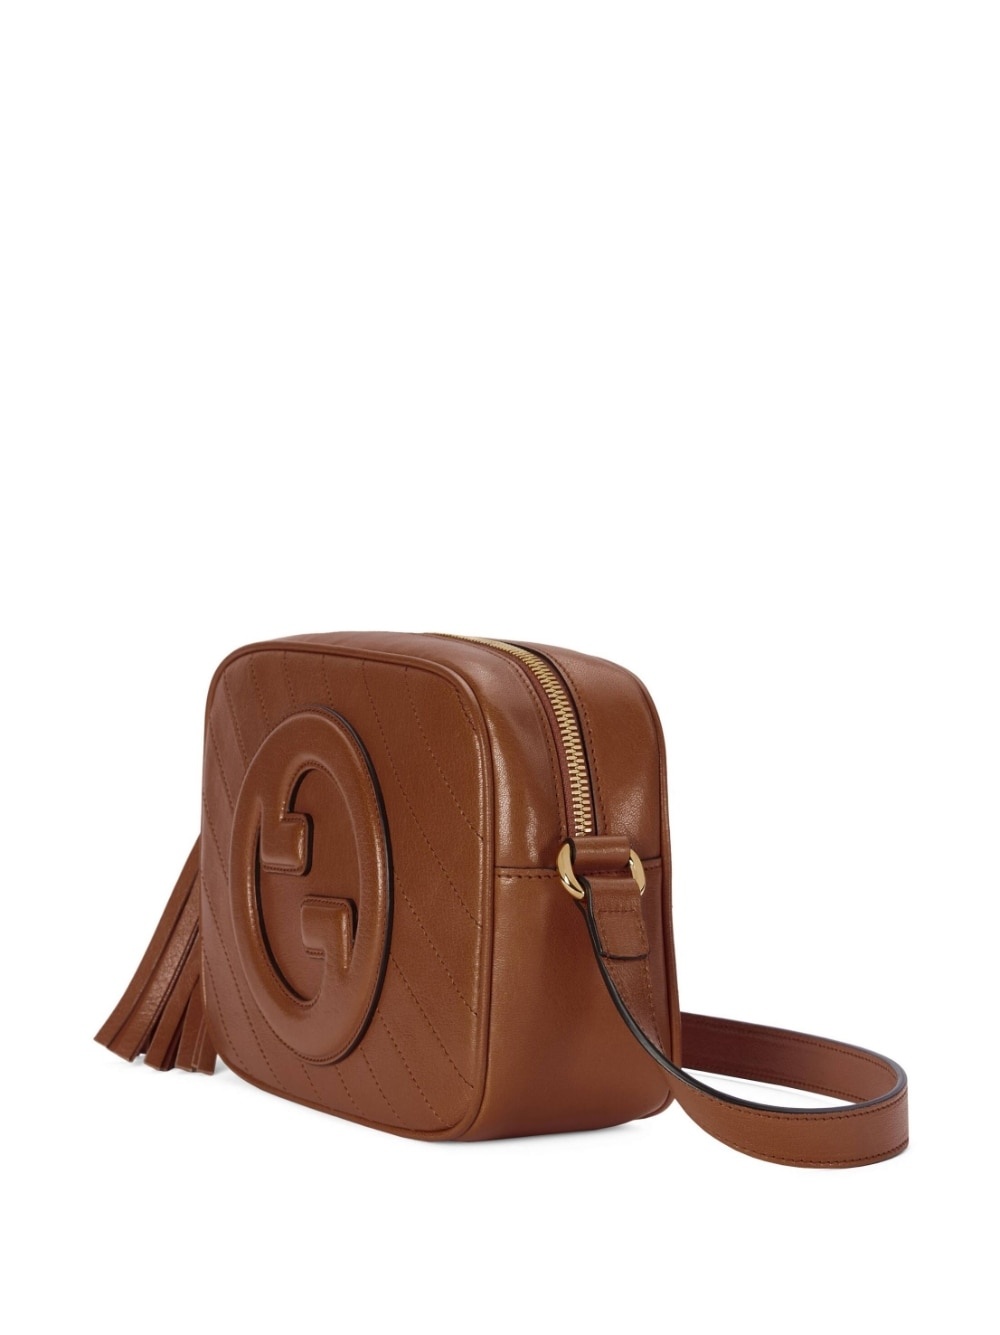 Gucci blondie small leather shoulder bag - 5